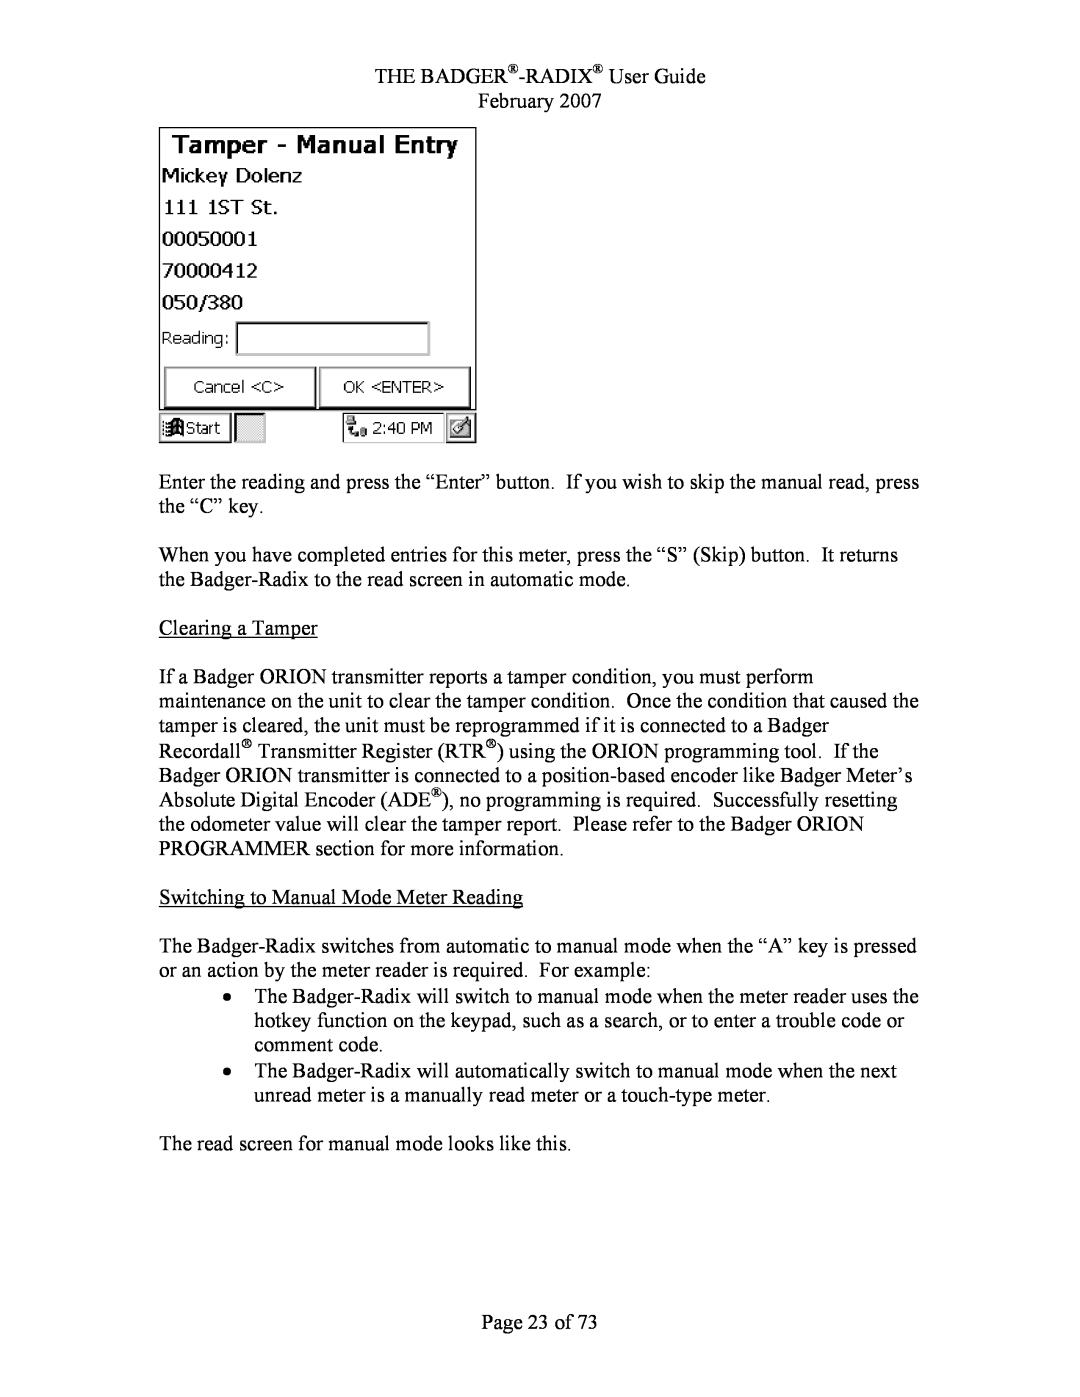 Badger Basket N64944-001, RAD-IOM-01 operation manual Clearing a Tamper, Switching to Manual Mode Meter Reading, Page 23 of 